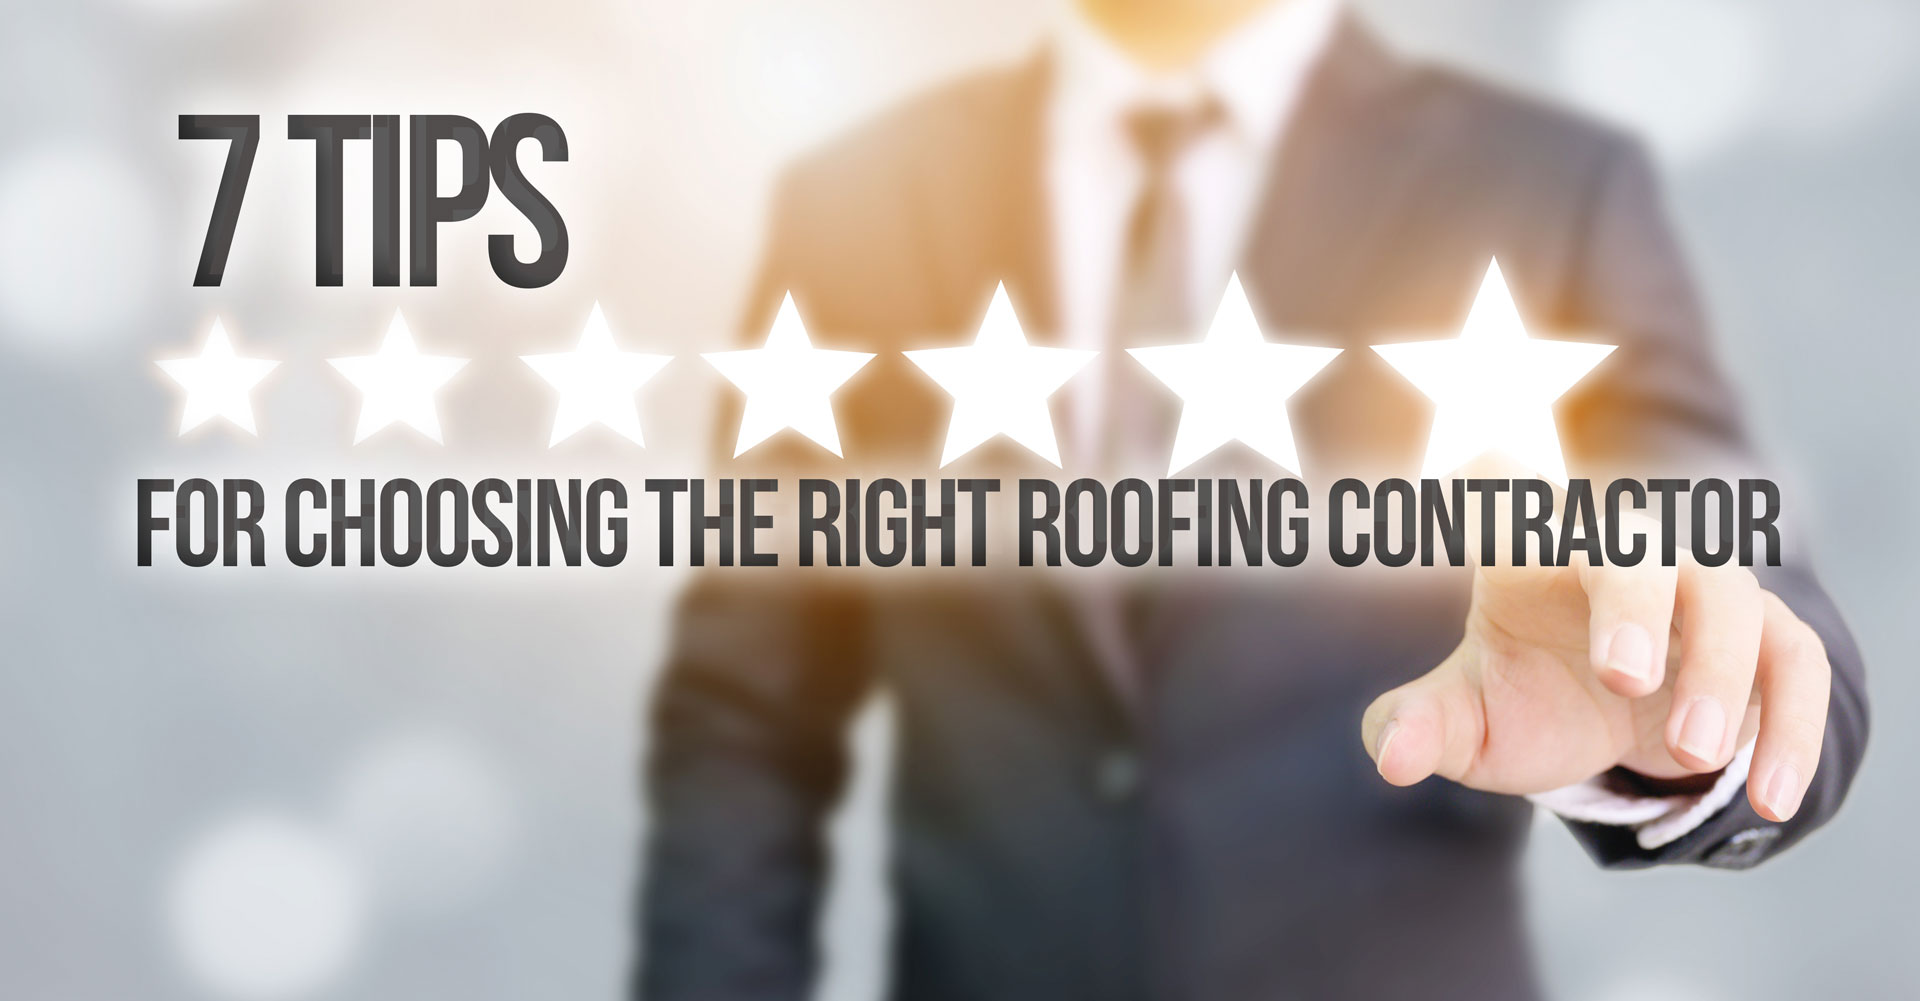 7 Tips to Help Busines Owners, Church Decision-Makers, and School Superintendents Choose the Right Roofing Contractor